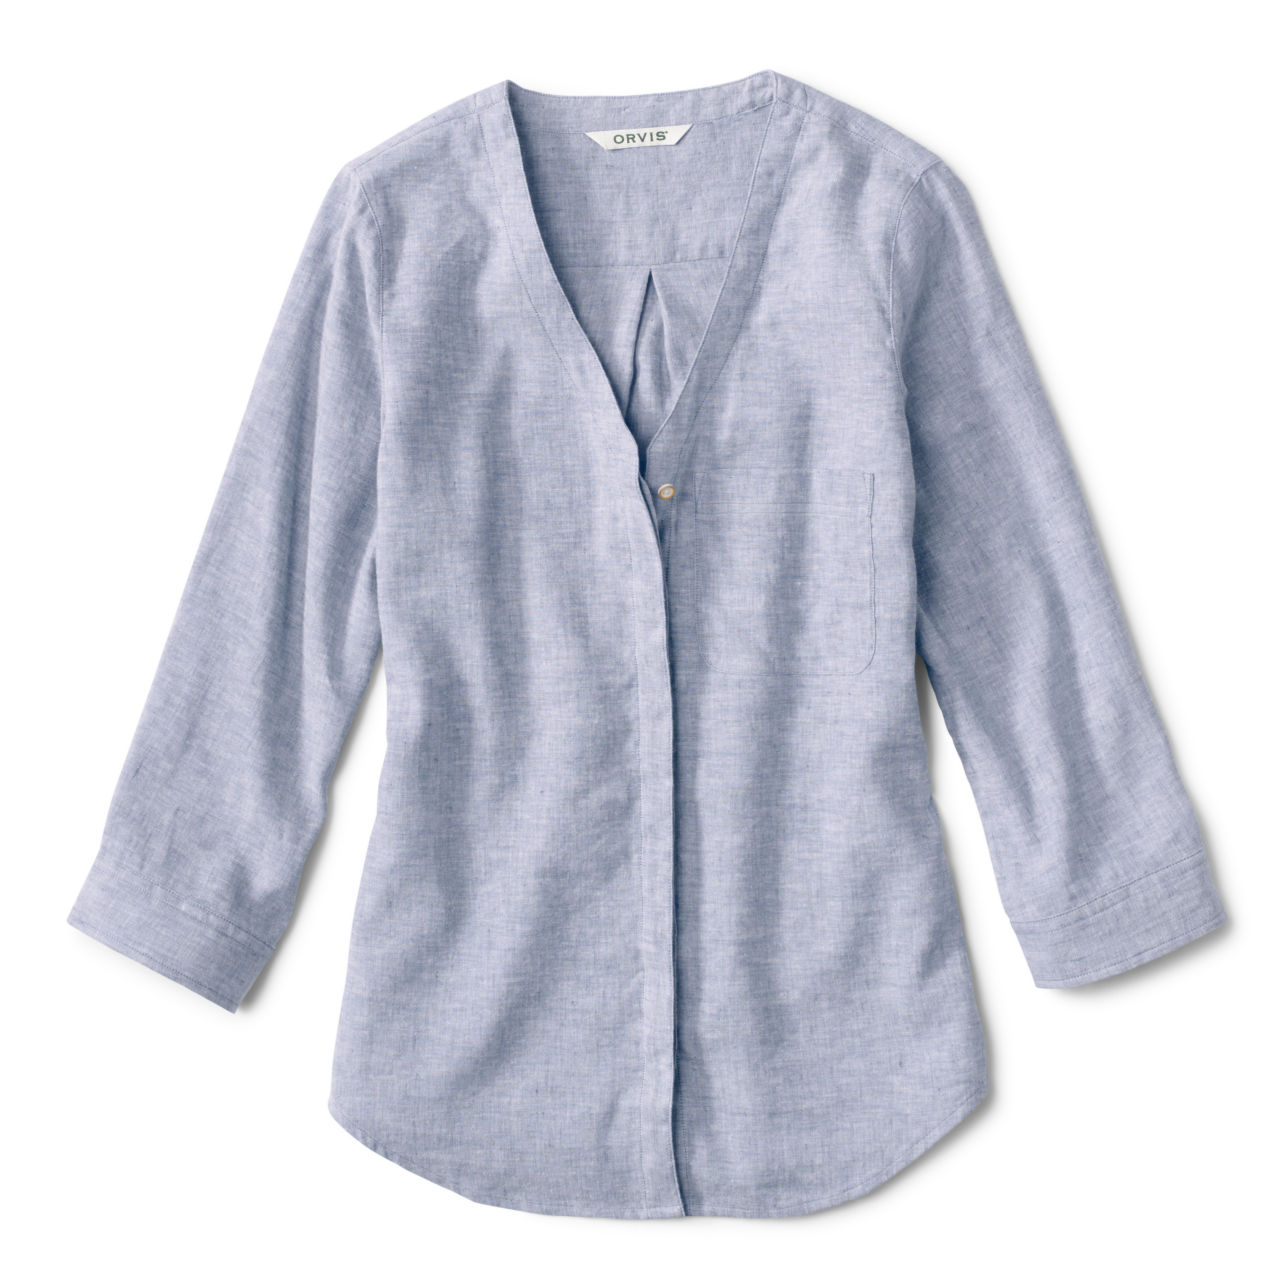 Women’s Performance Linen Three-Quarter-Sleeved Shirt - DUSTY BLUE CHAMBRAY image number 5